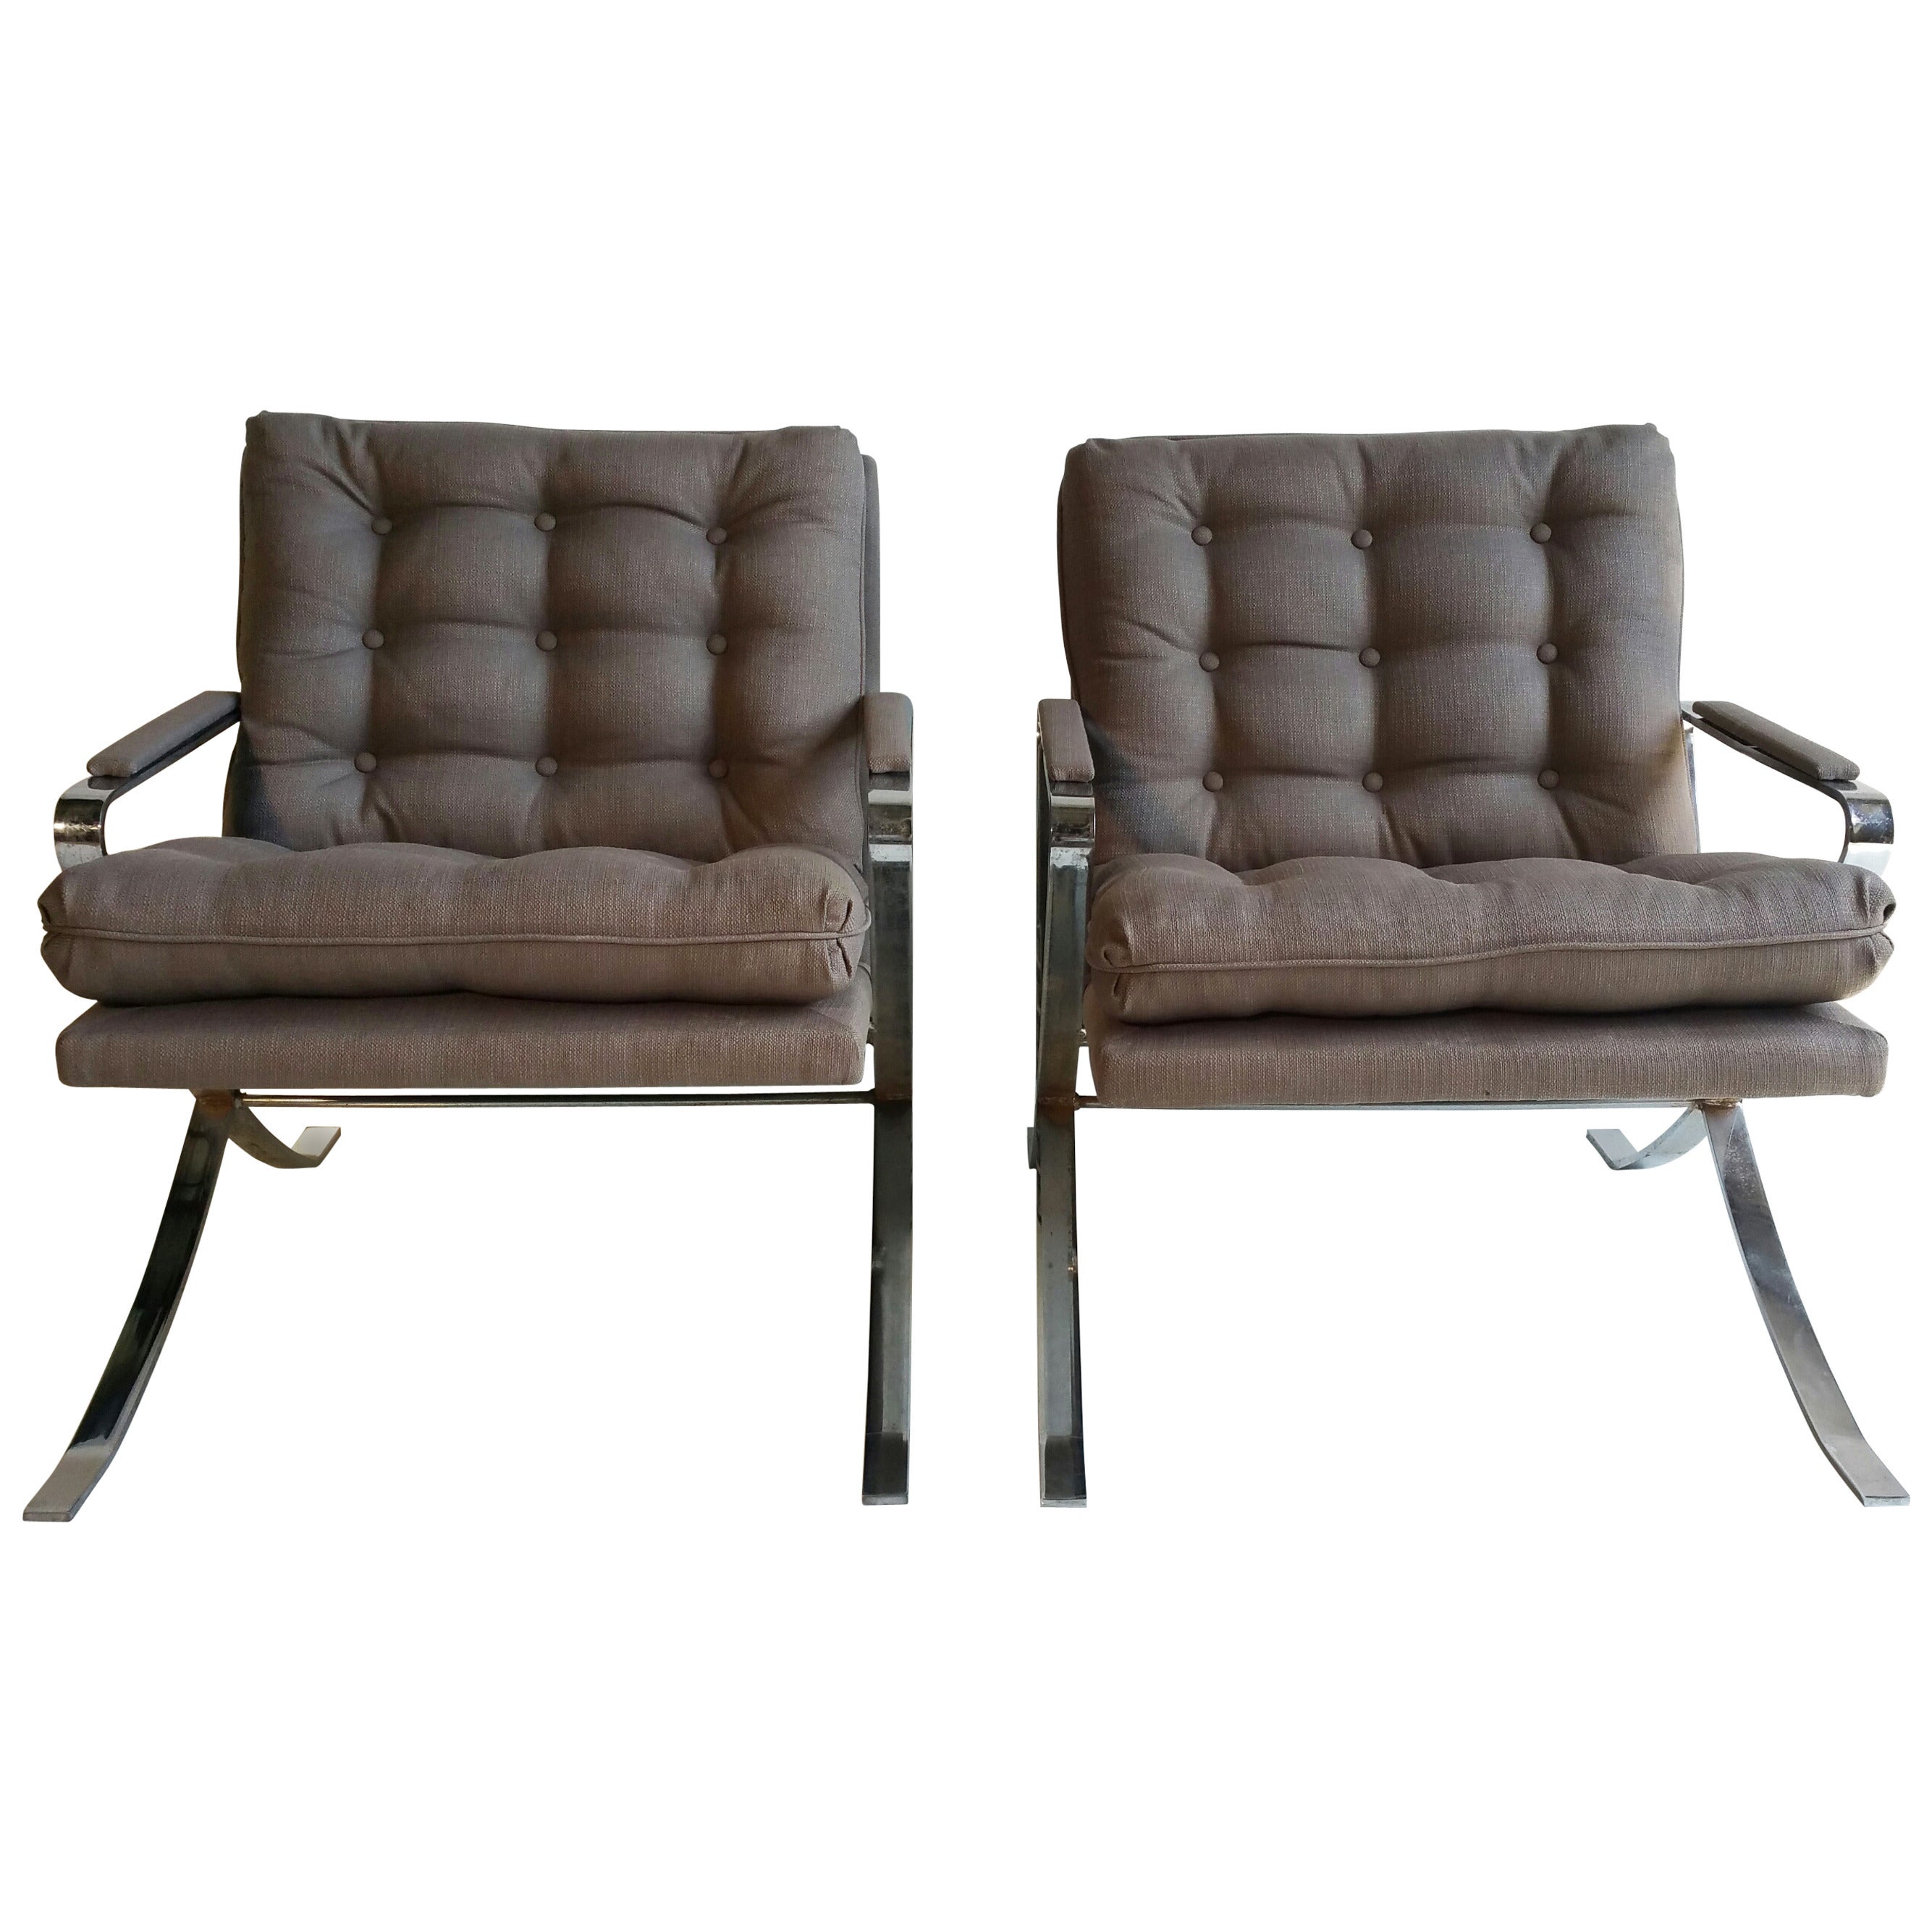 Pair of 1970s Flat Steel Chrome Lounge Chairs, Milo Baughman Inspired